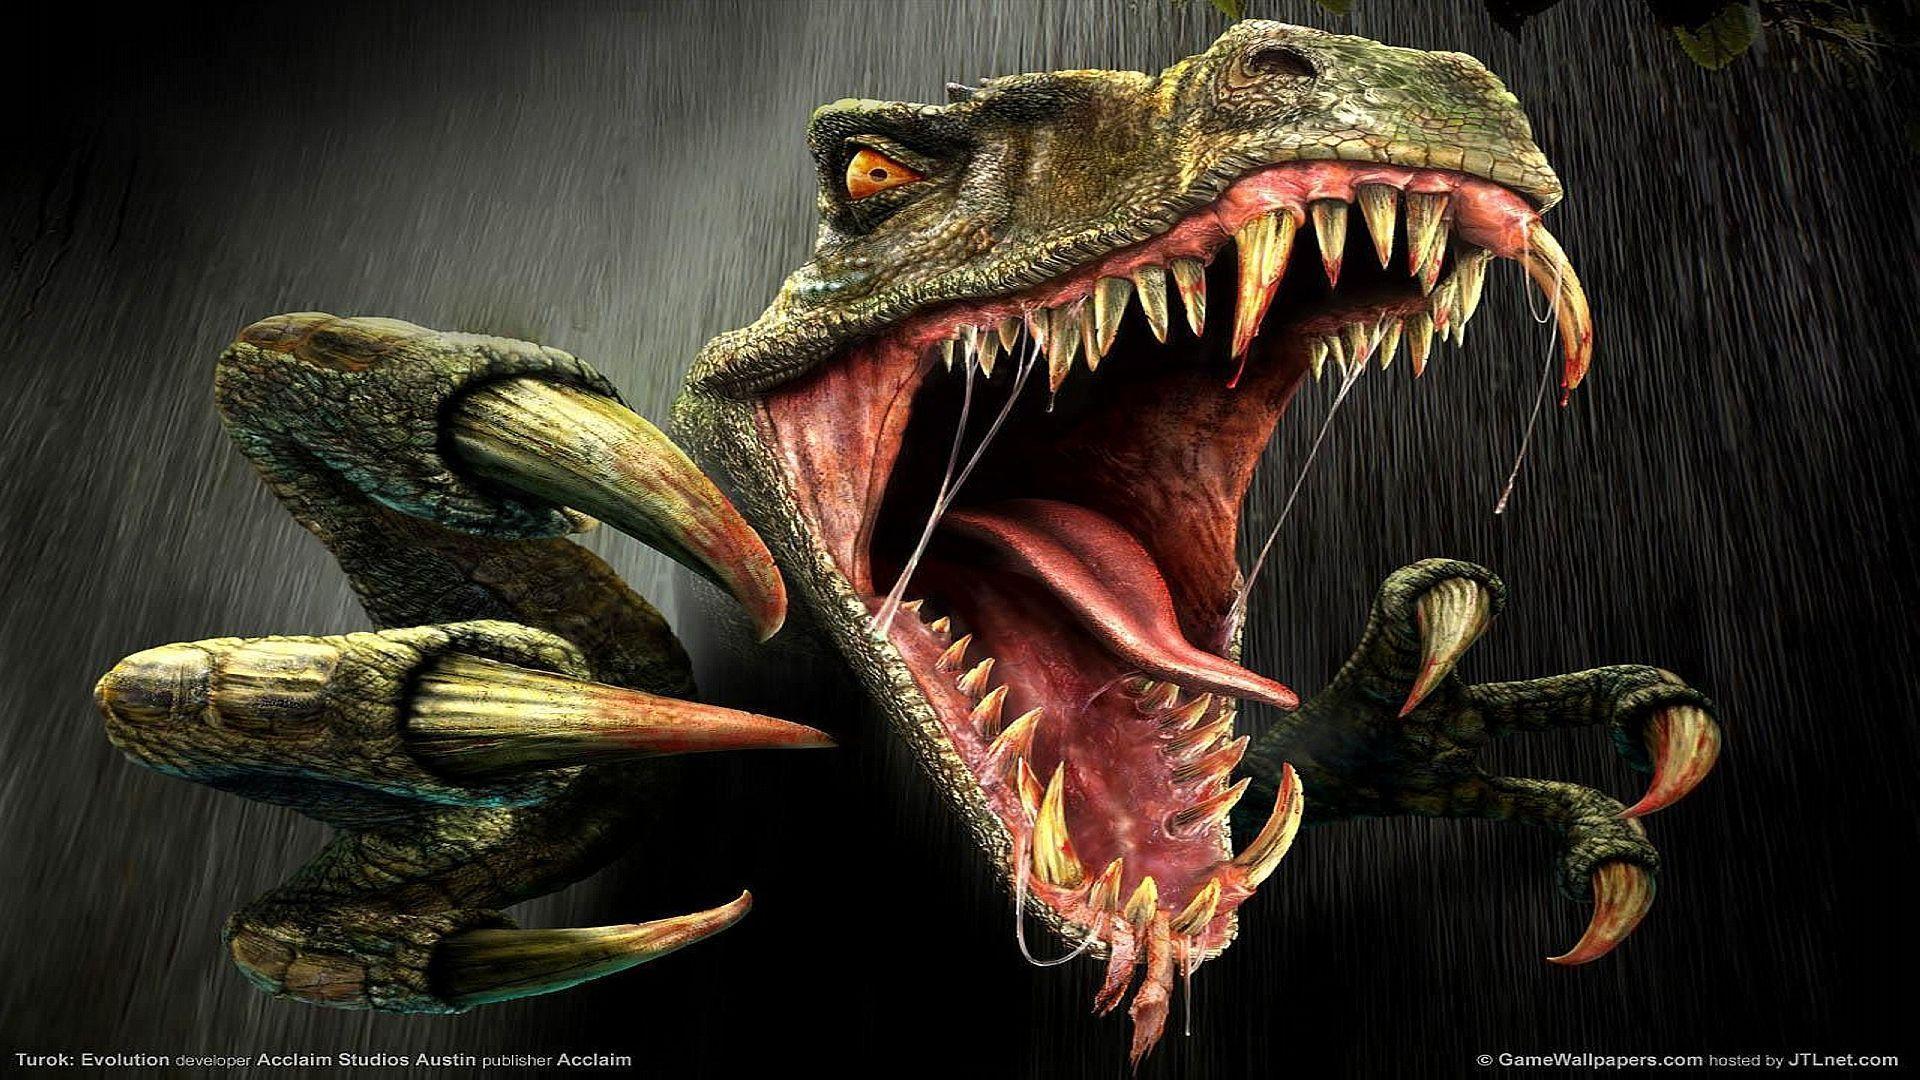 Download Dinosaur Image Miscellaneous Other Top Wallpaper